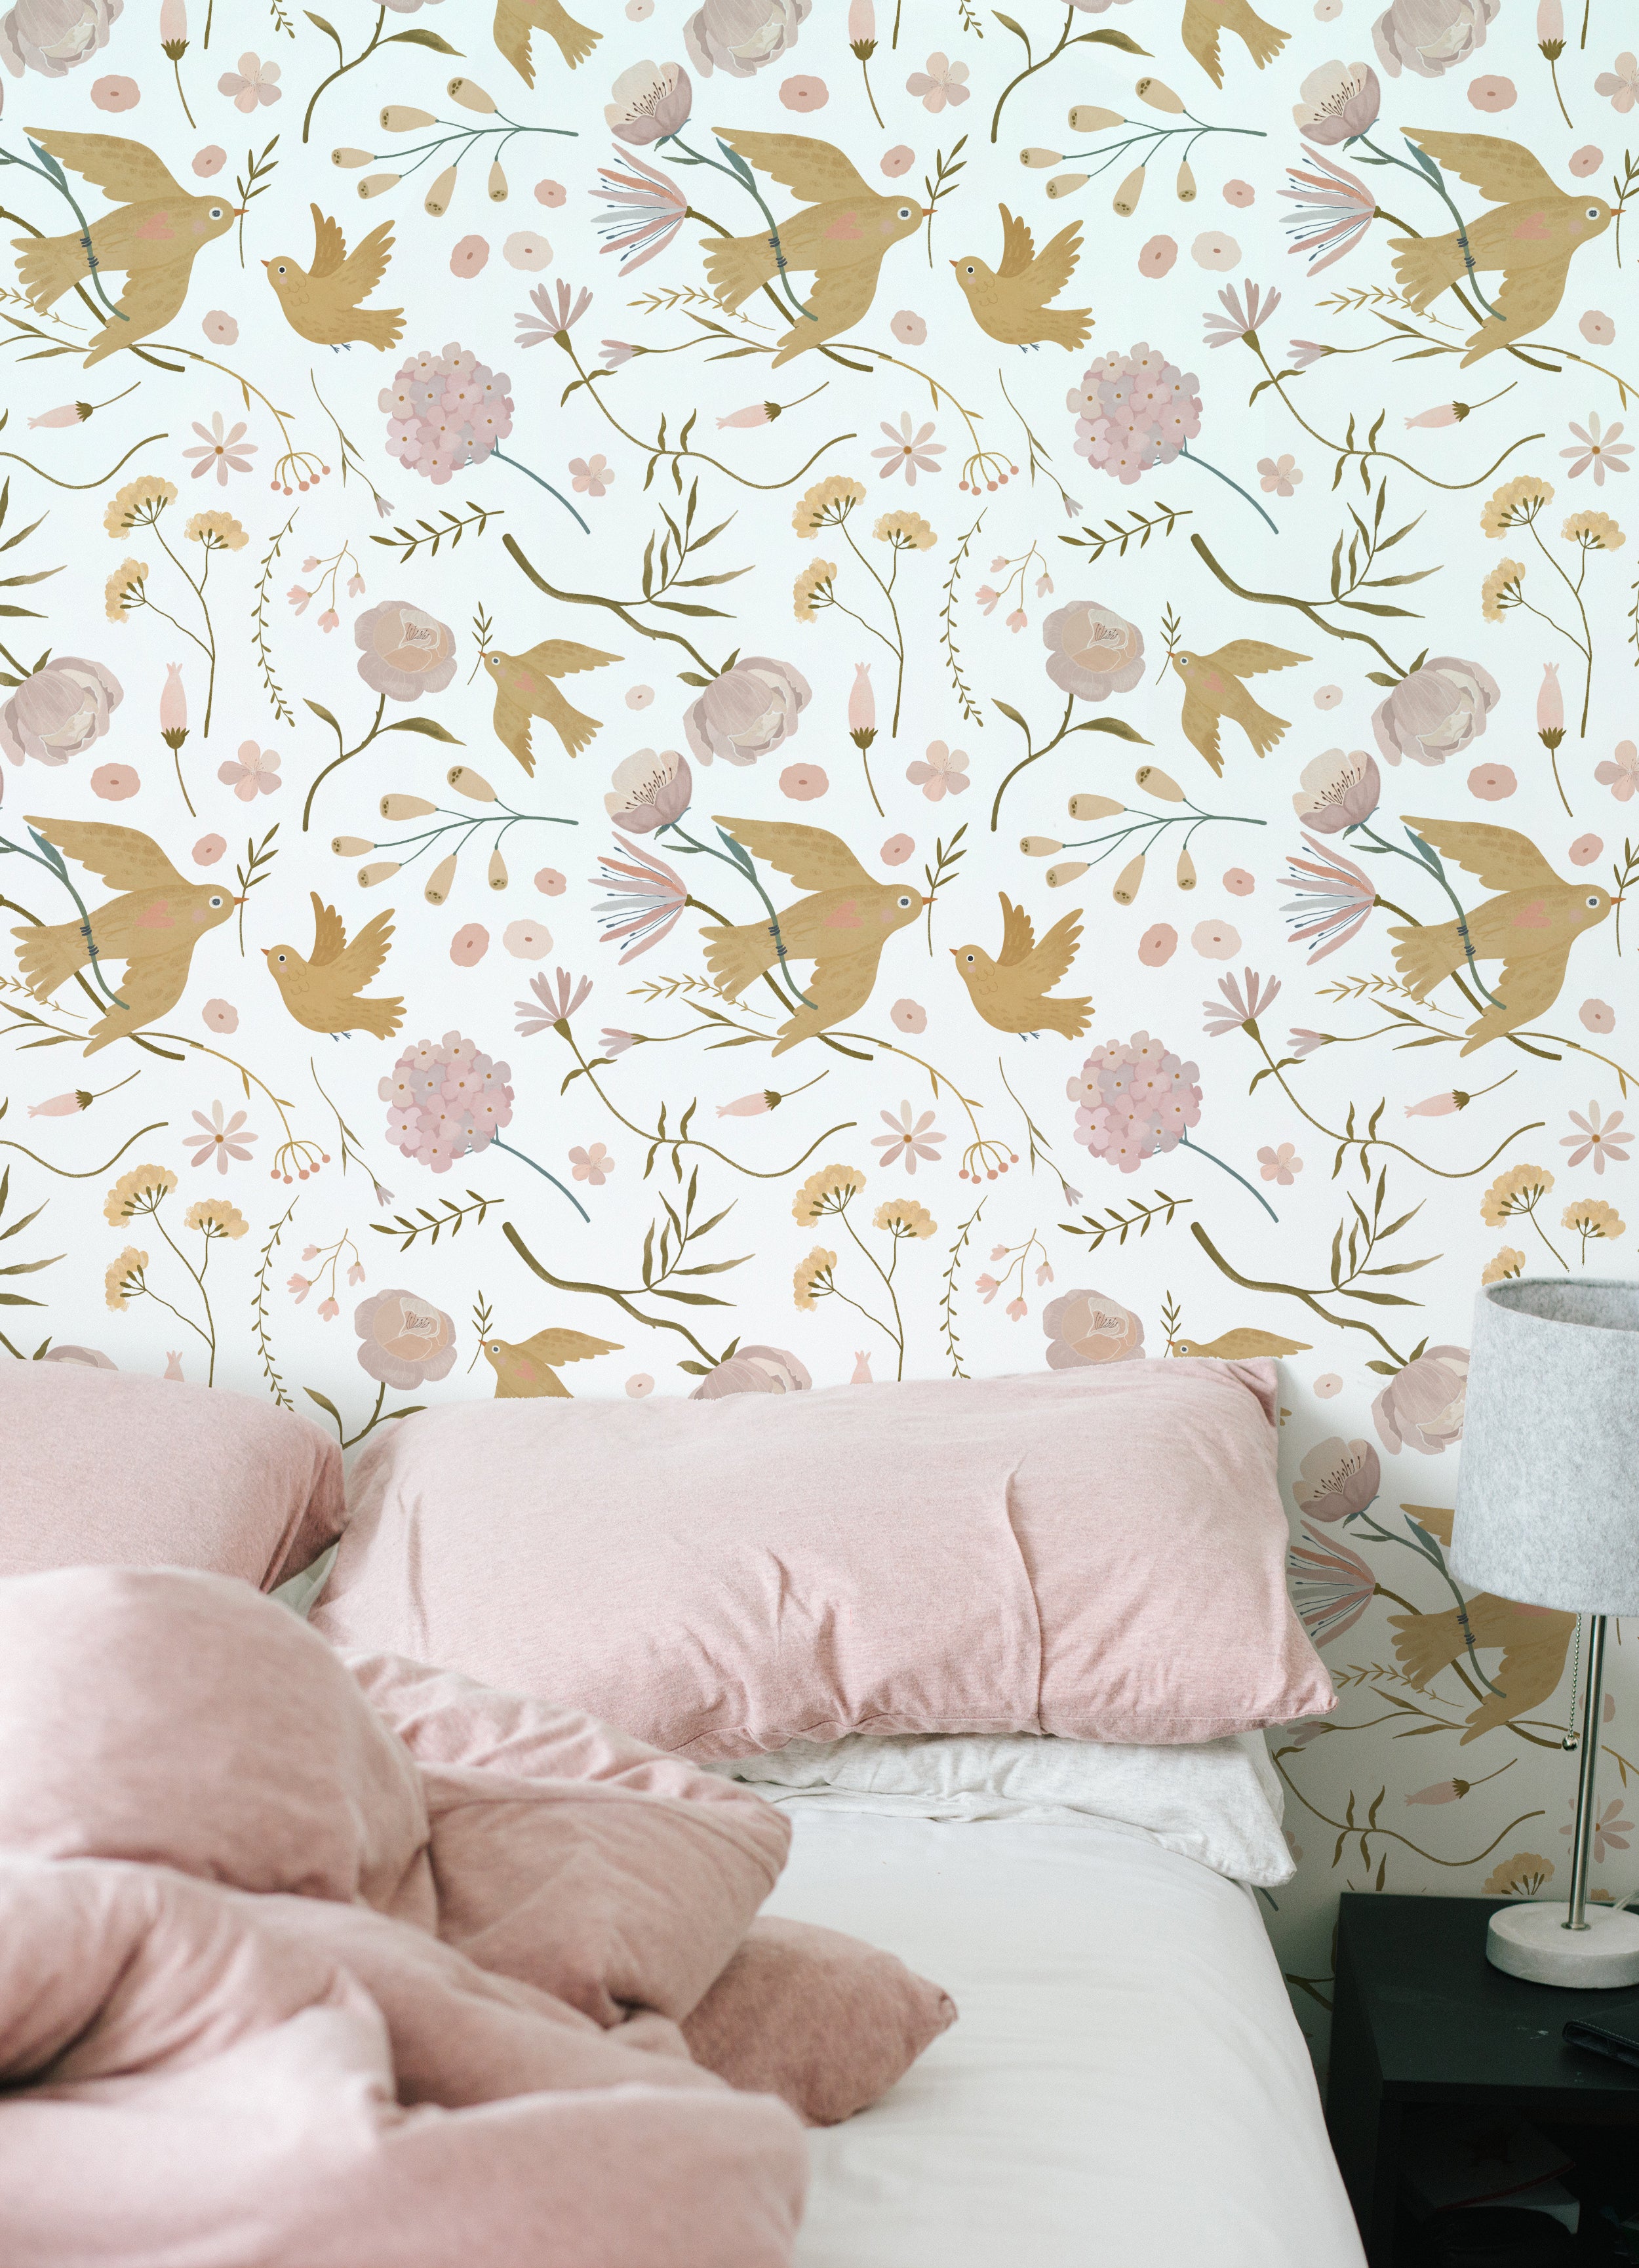 A cozy bedroom with the Pastel Garden Wallpaper creating a soothing backdrop. The wall is adorned with depictions of birds and delicate flowers in soft pinks and greens, complementing the plush pink bedding